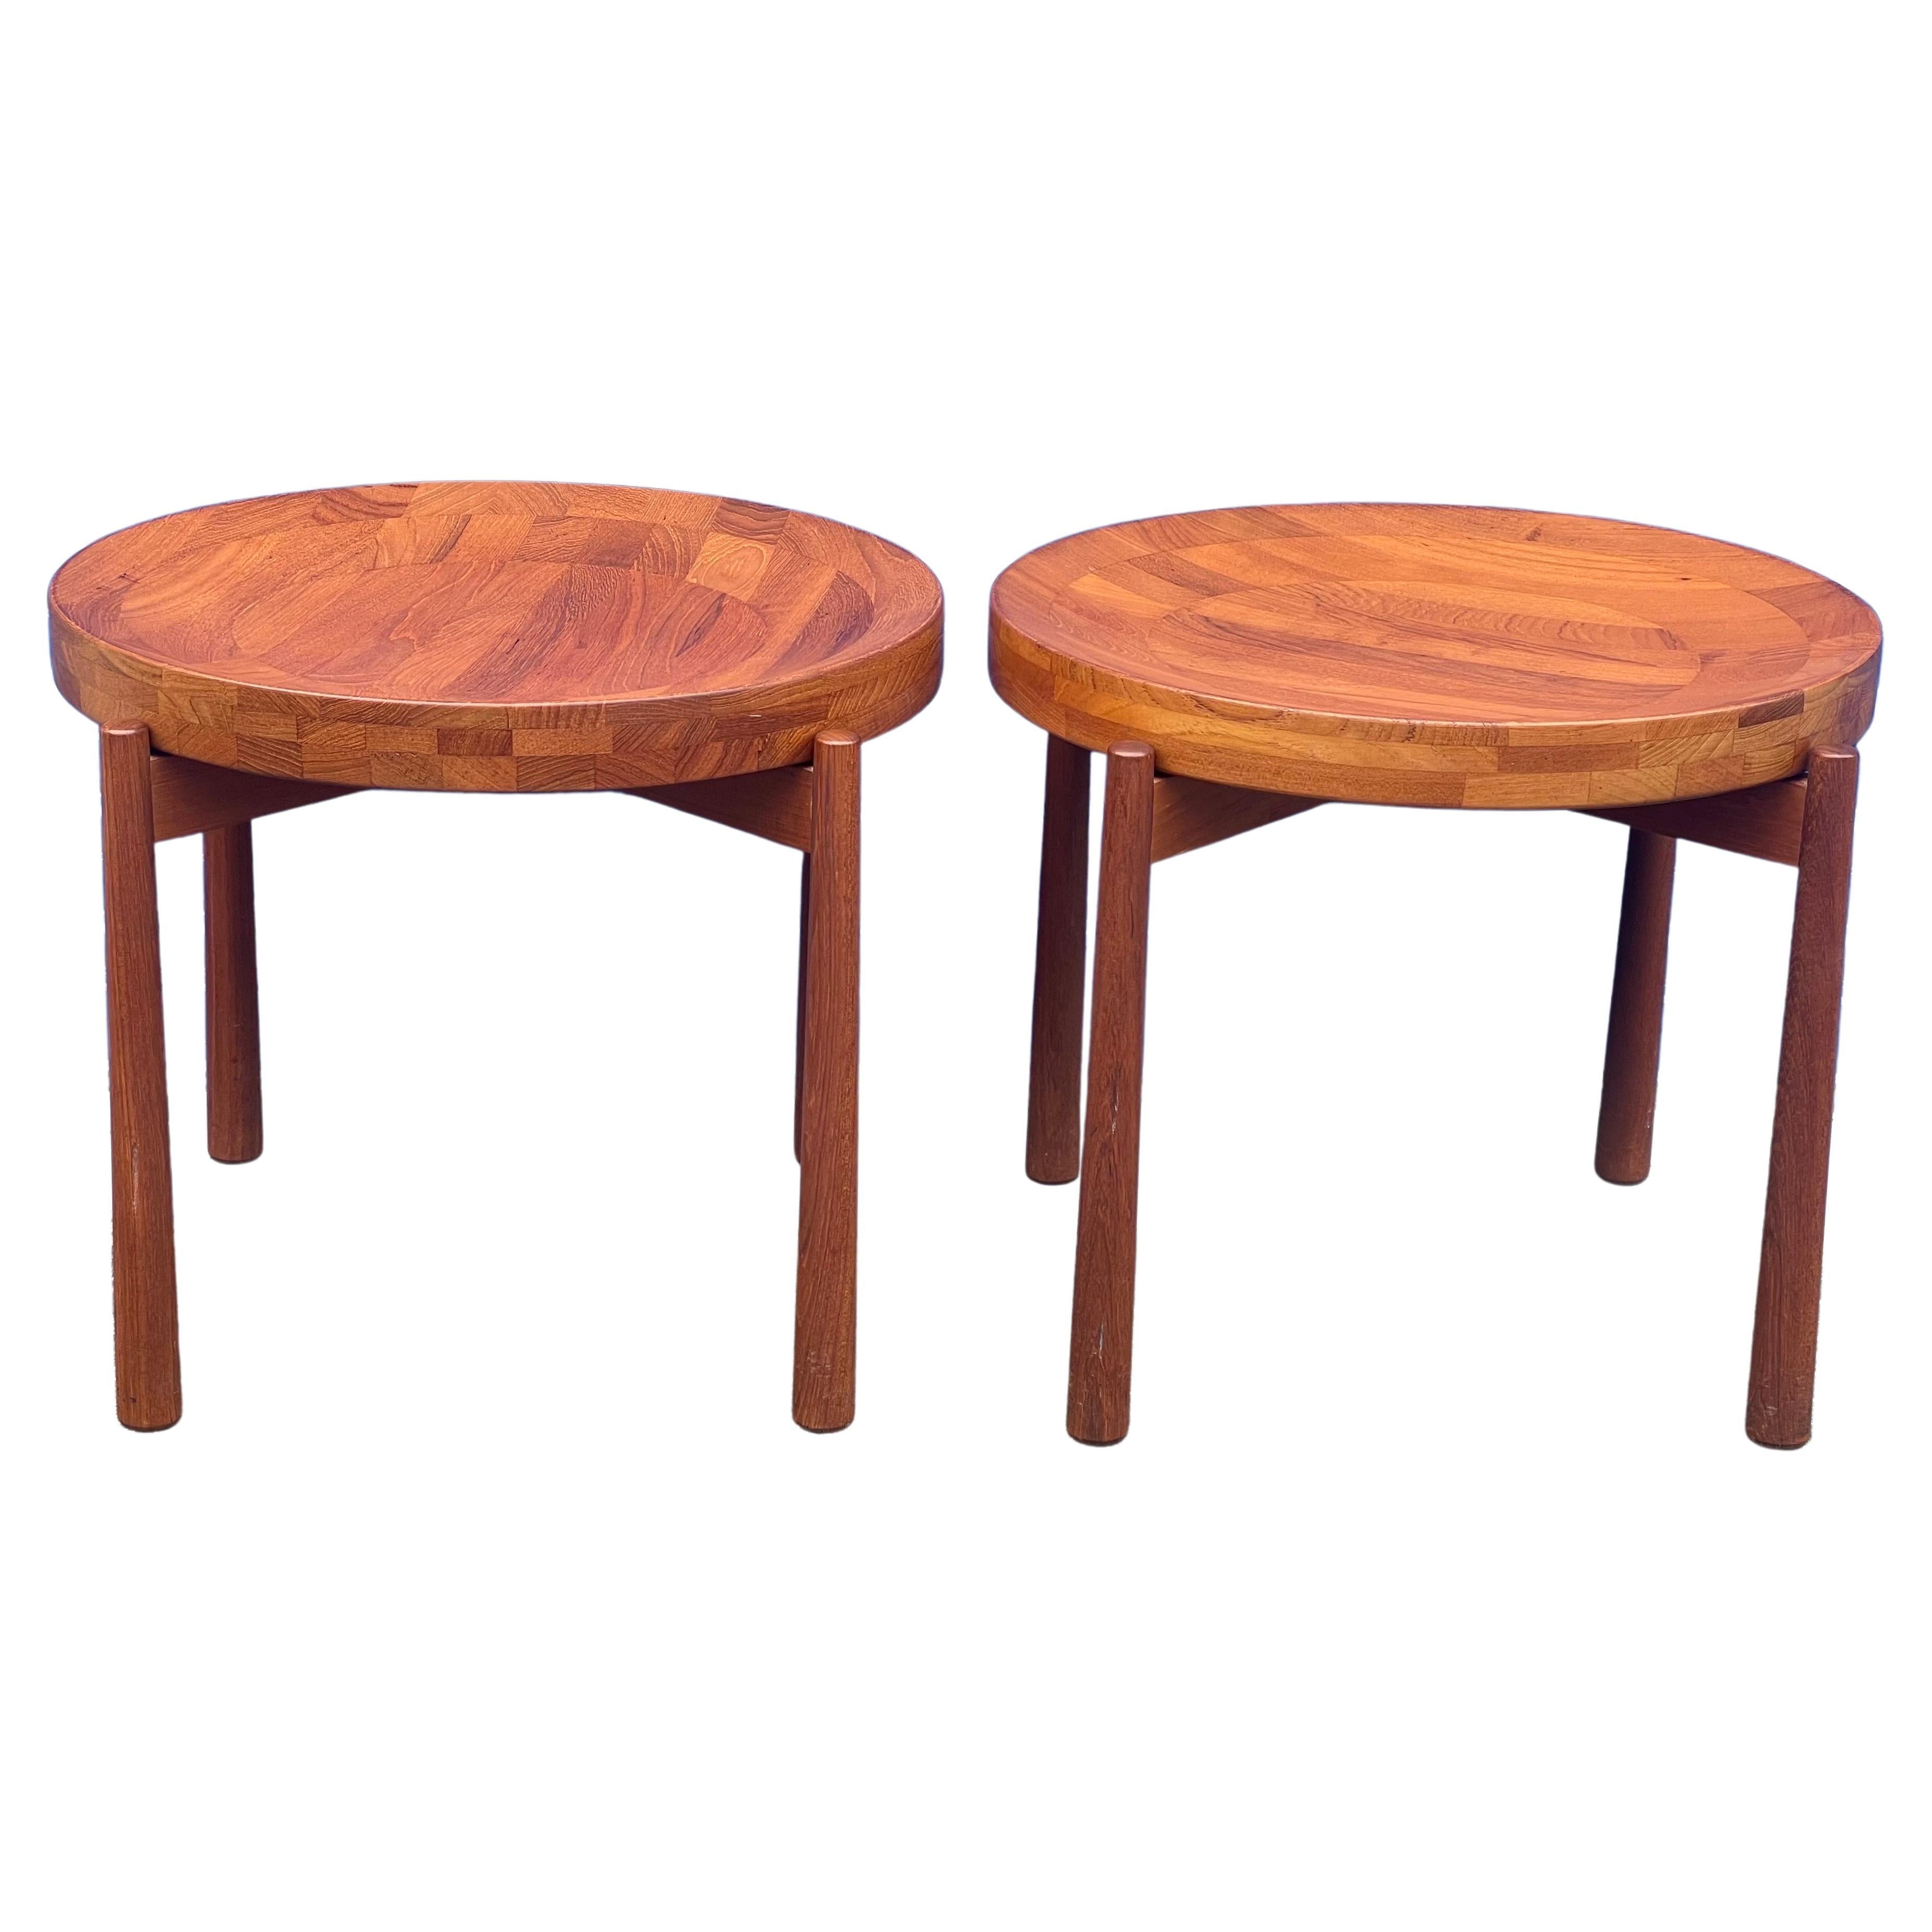 Pair of Teak Tray Side Tables Attributed to Jens Quistgaard for DUX of Sweden For Sale 11